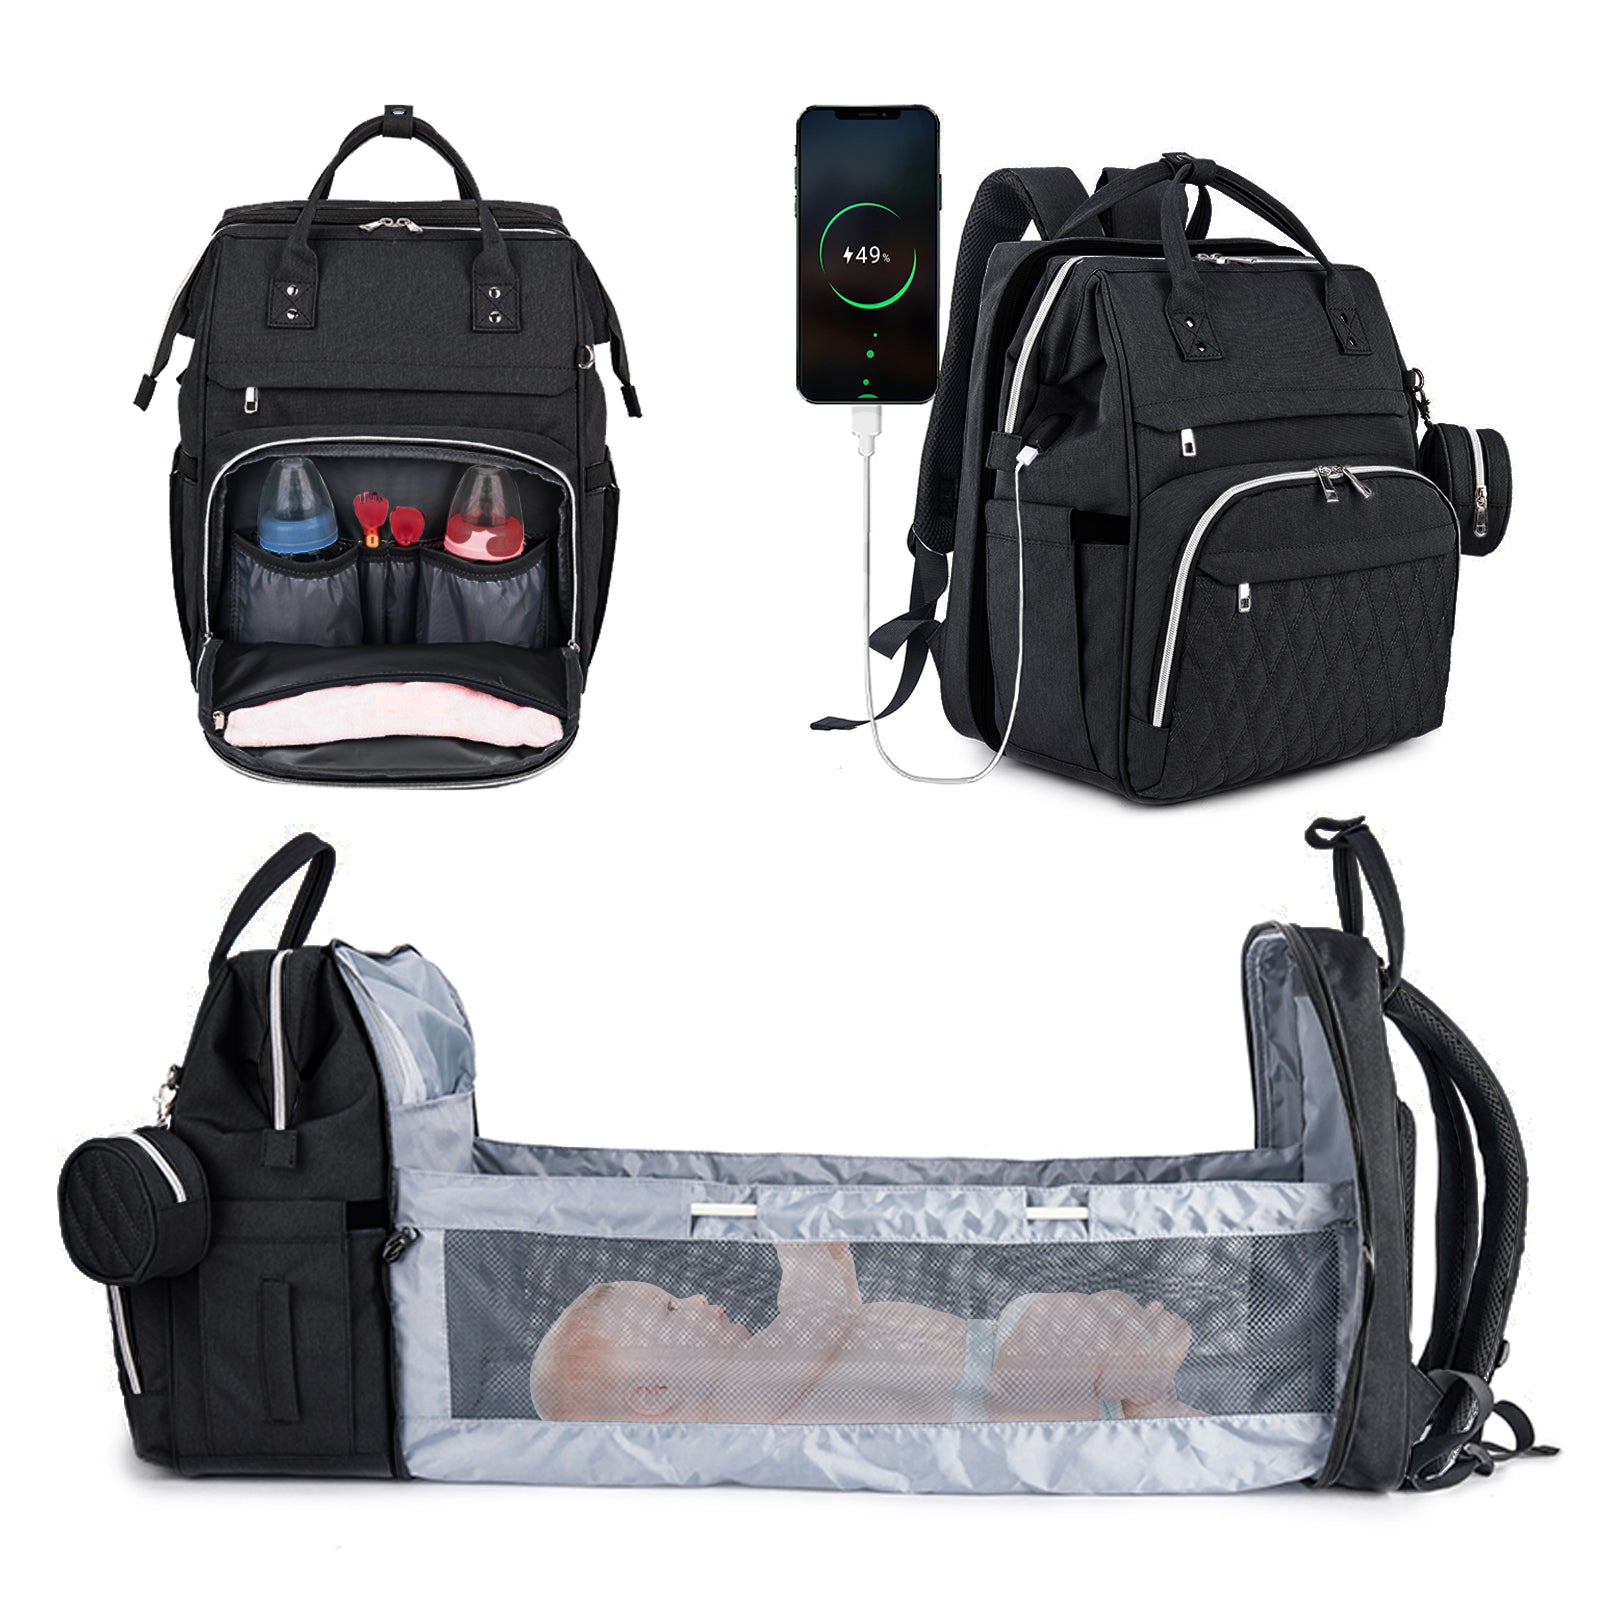 Diaper Bag Backpack, Large Baby Multifunction Waterproof Fabric Travel Nappy Changing Backpack with USB Charging Port and Insulated Bottle Warmer Pockets